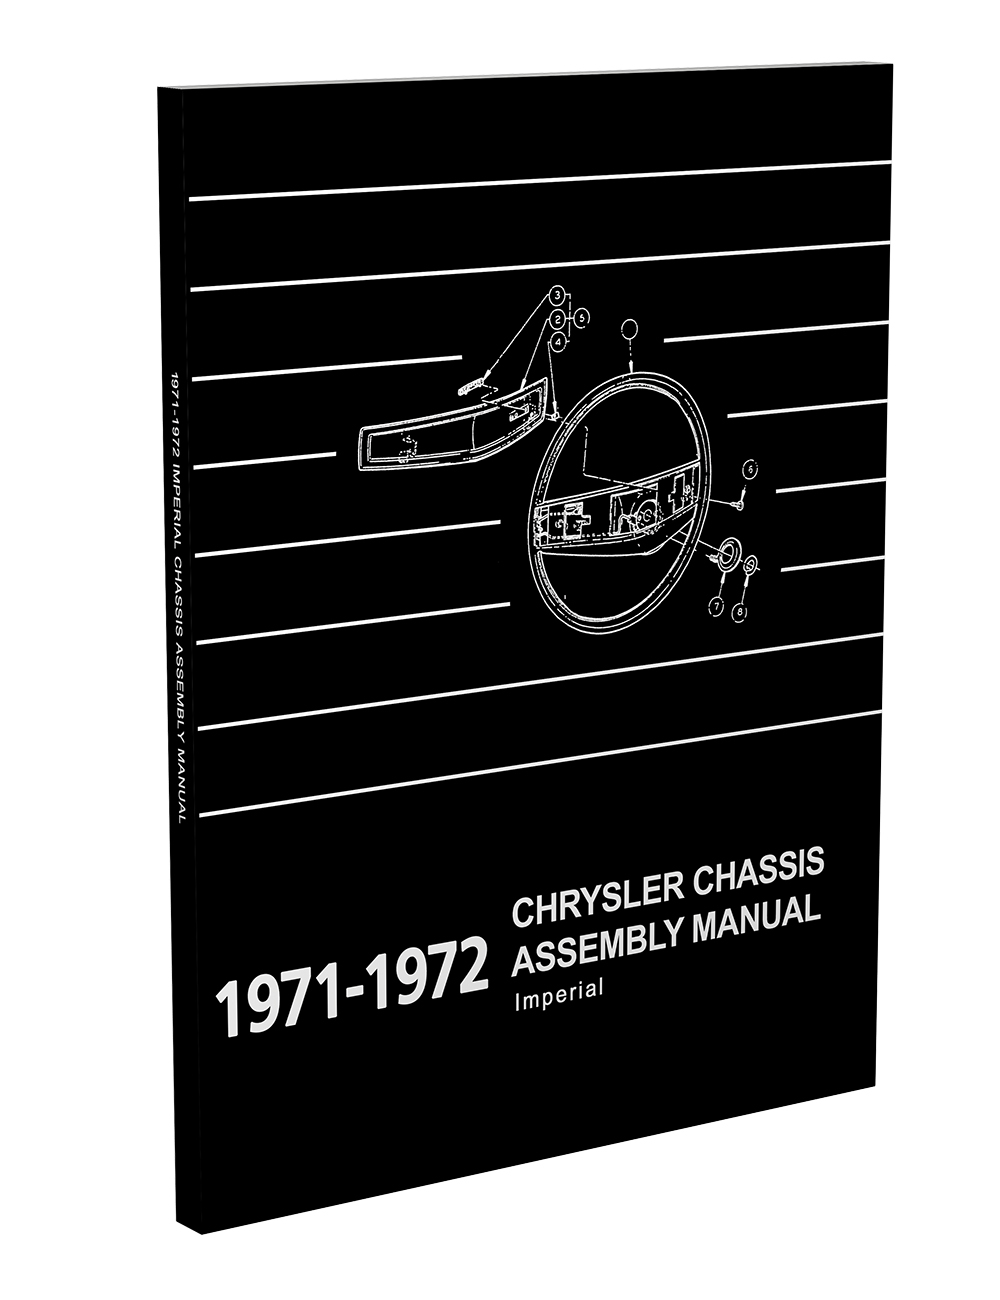 1971-1972 Chrysler Imperial Chassis Assembly Manual Reprint 